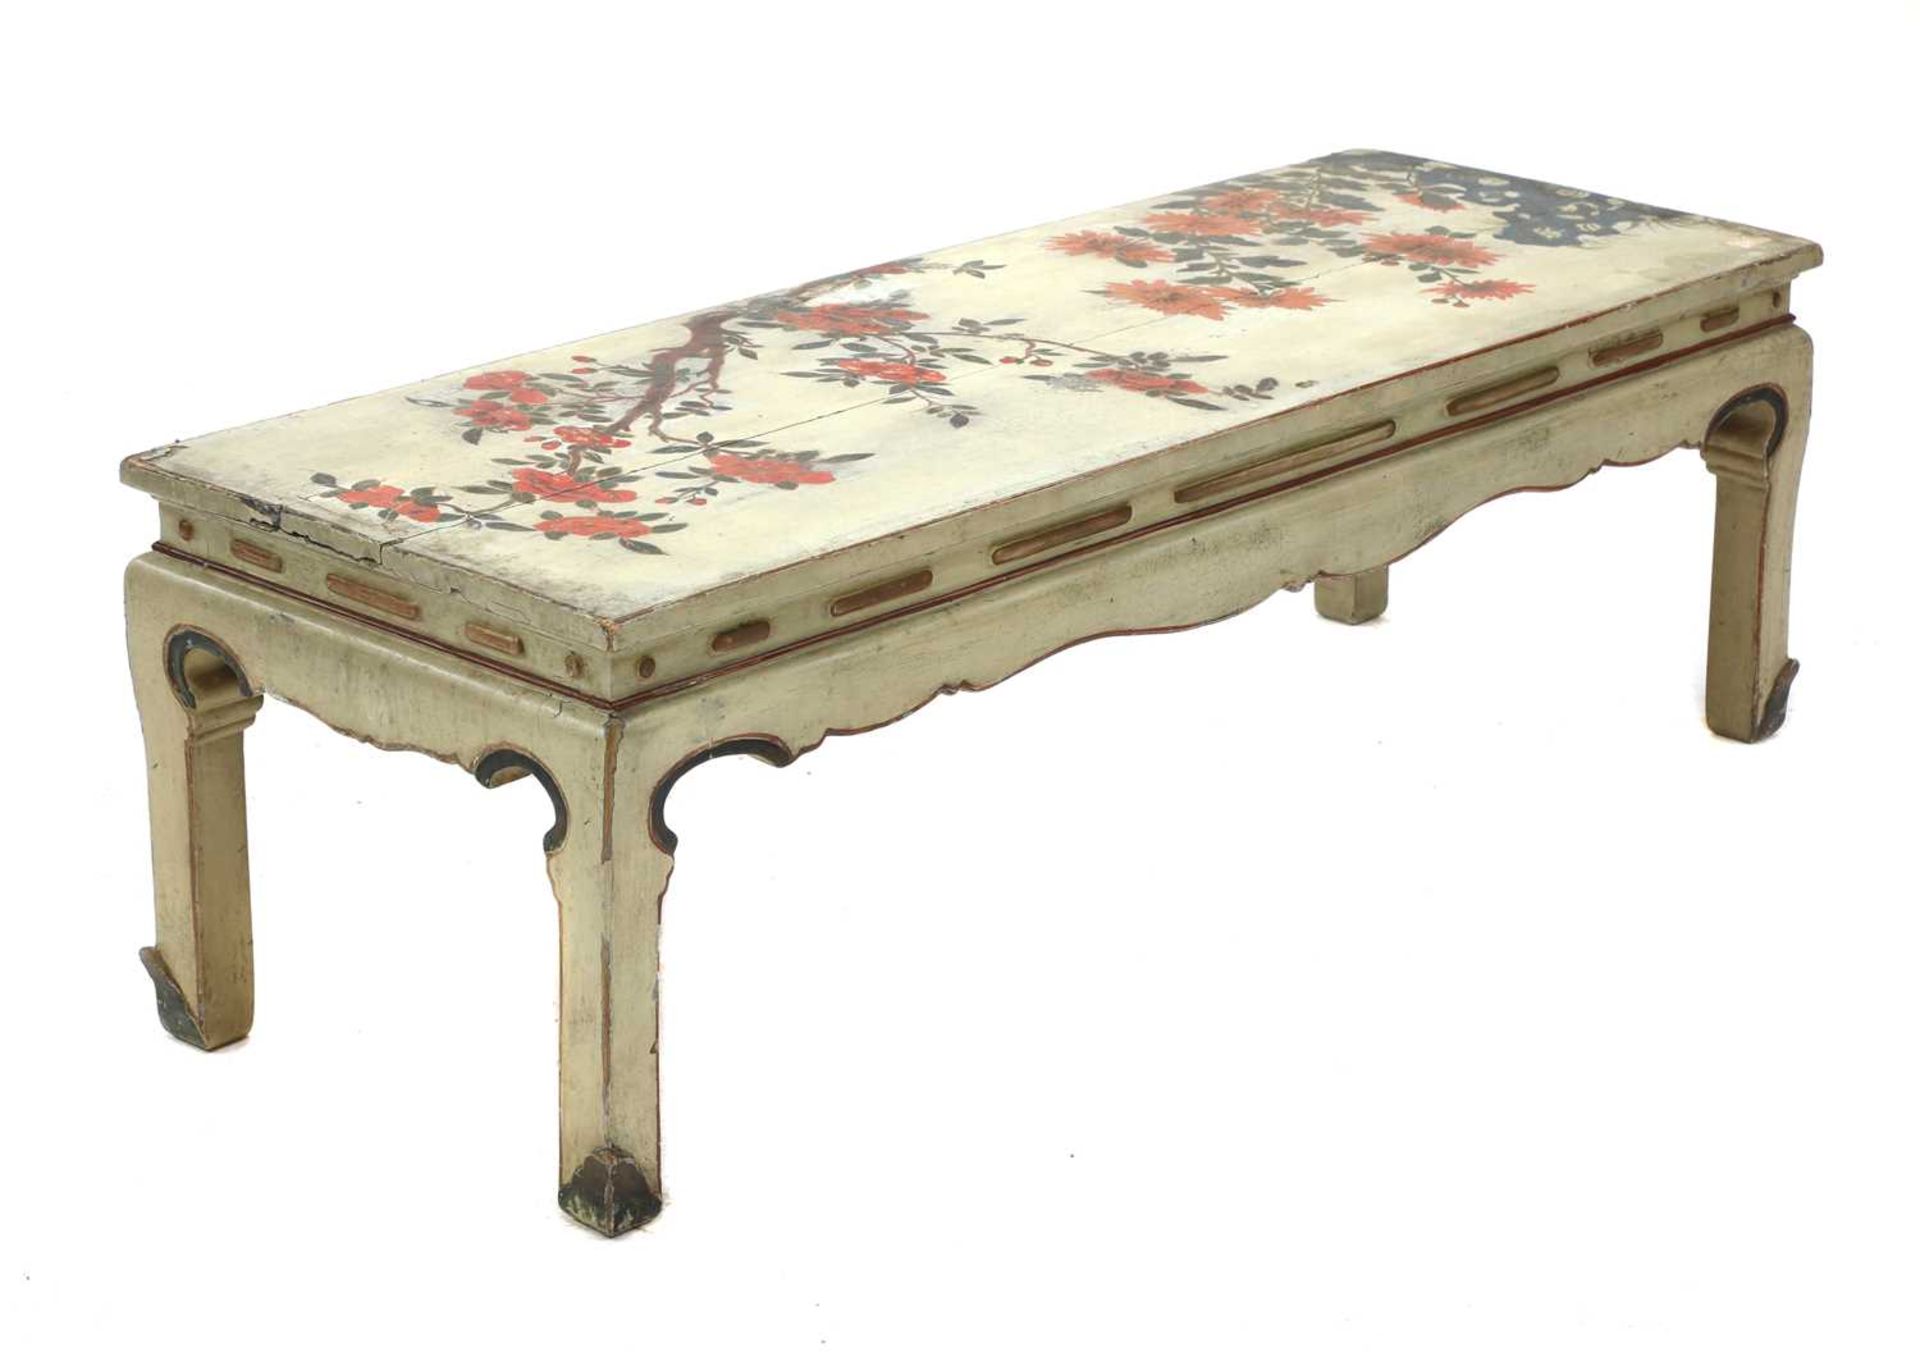 A lacquered and painted Chinese-style low table